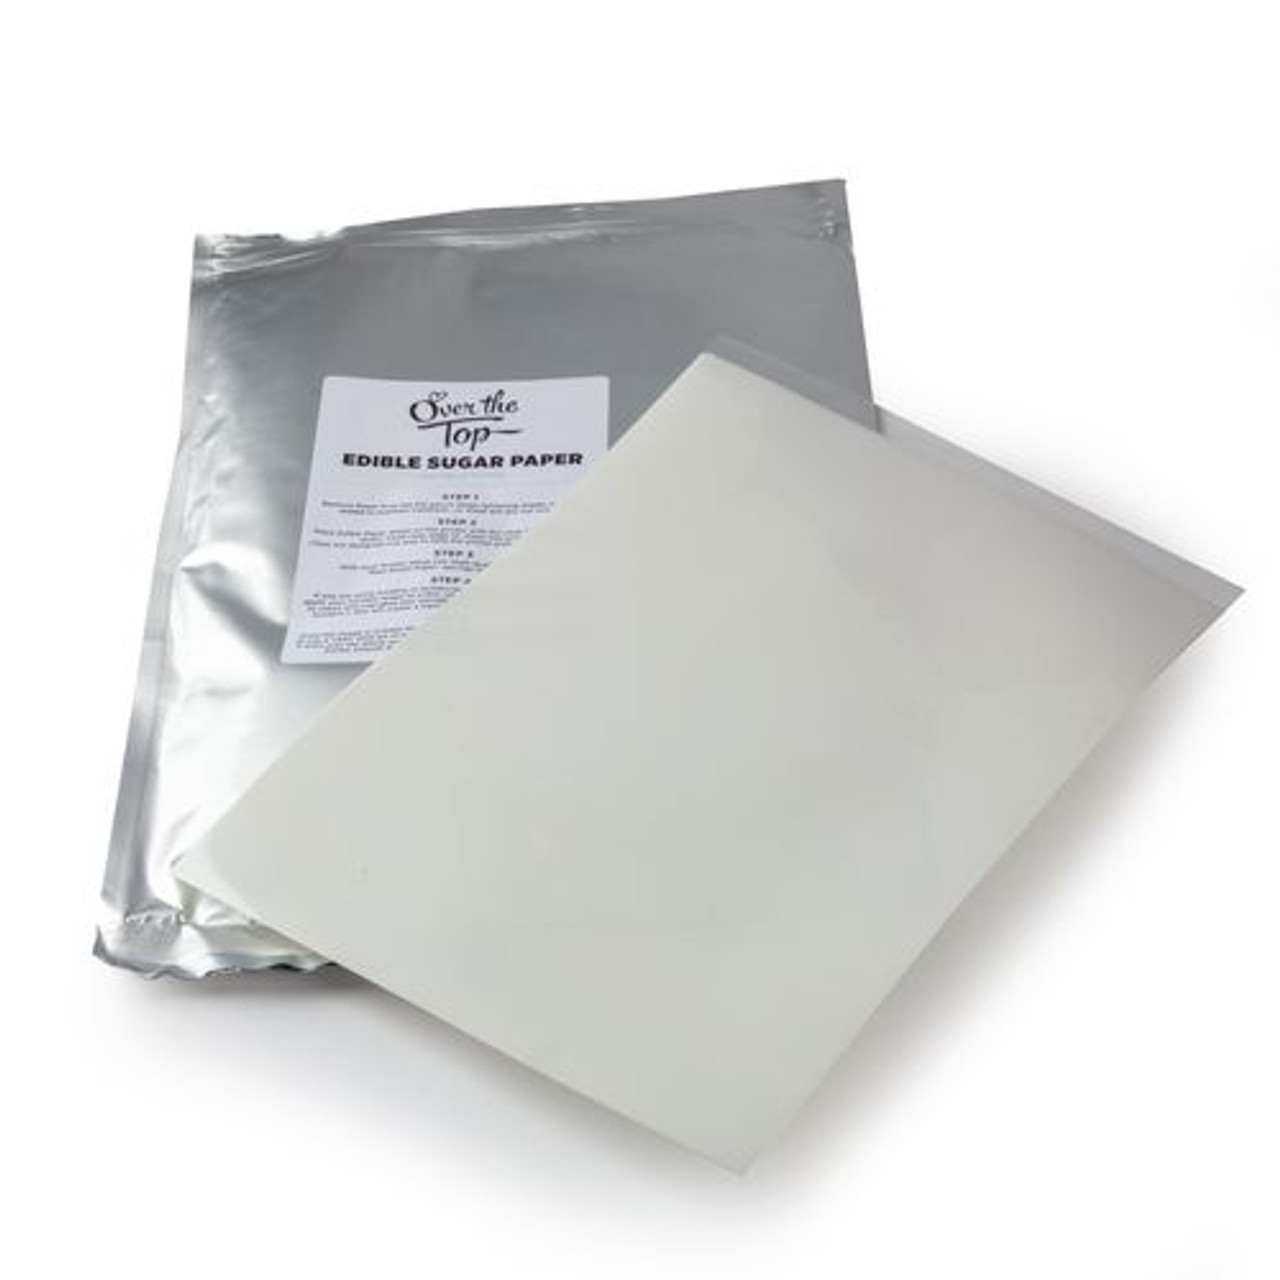 Wafer Paper or Icing Sheets Which Should I Choose for Edible Printing?